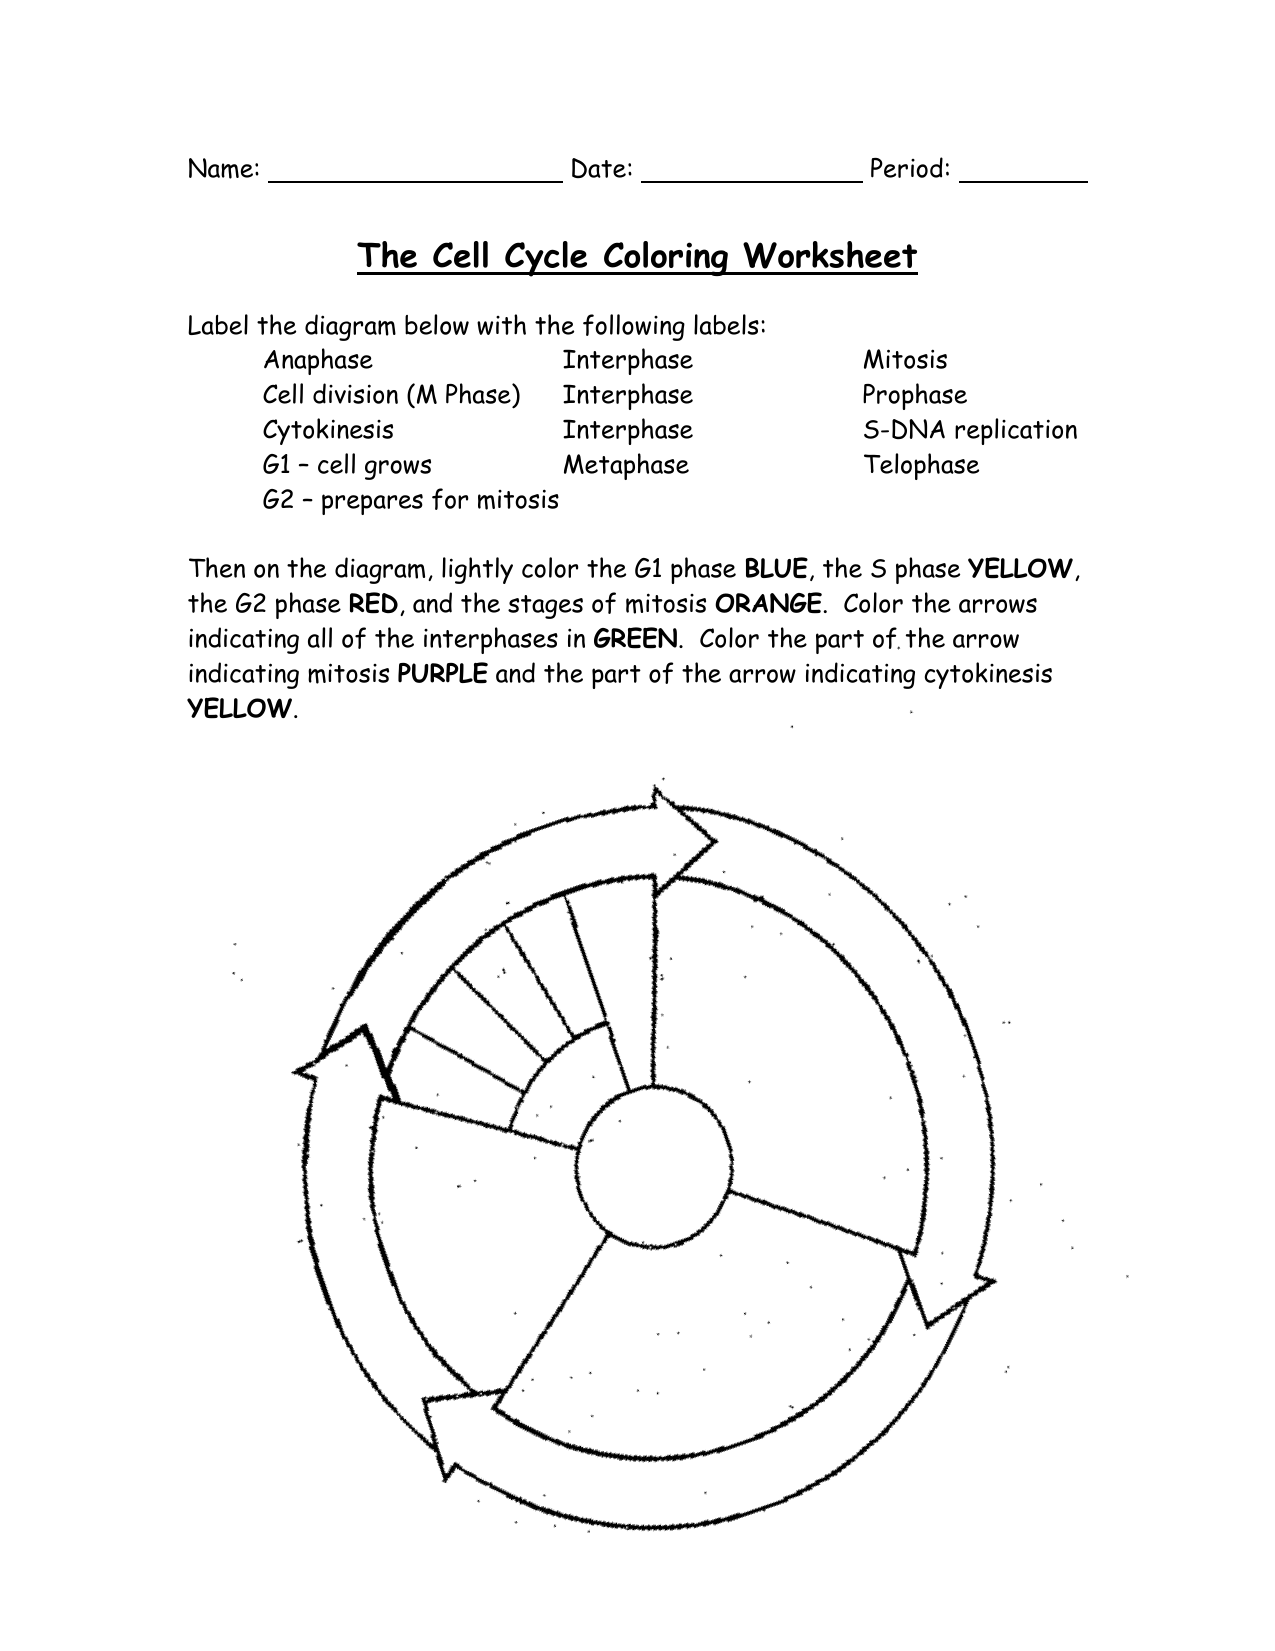 The Cell Cycle Coloring Worksheet Answers FREE Printable Worksheets Worksheet Template Tips 